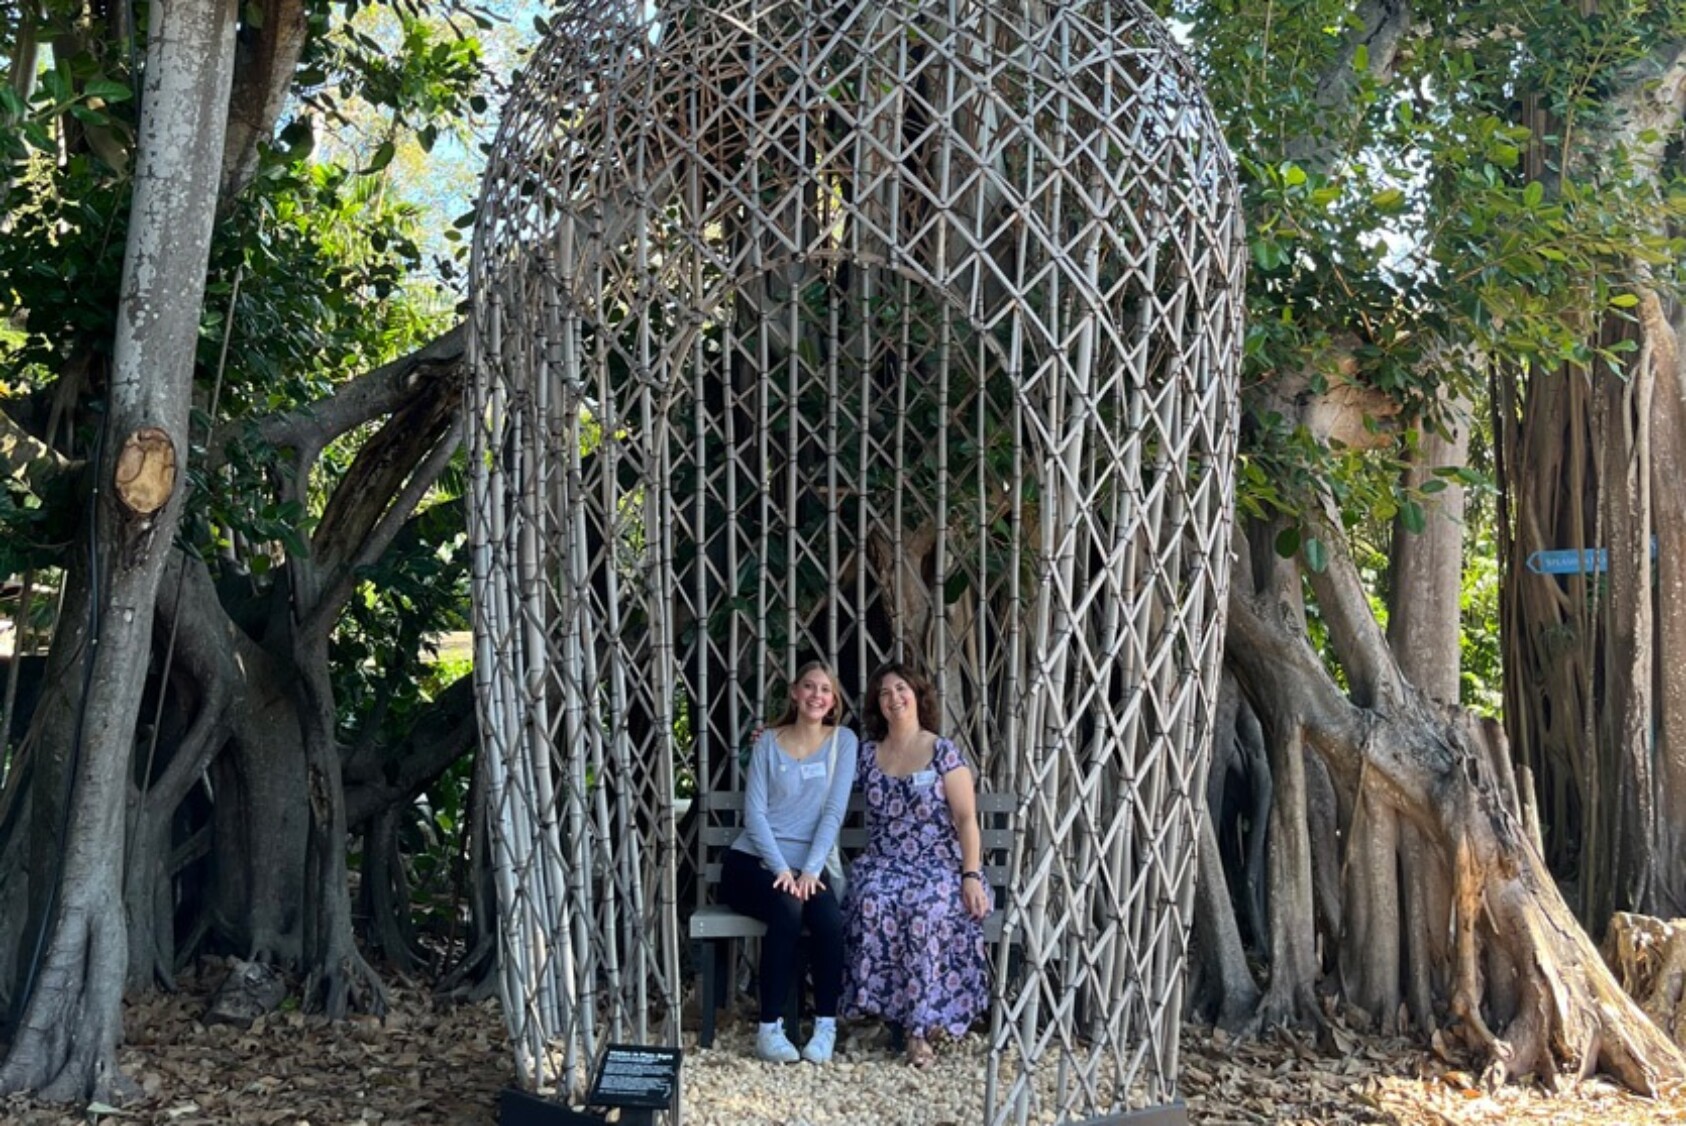 Karon Coleman ’88 sits next to her daughter Cecilia inside “Hidden in Plain Sight,” a 25-foot-tall Eastern screech owl. This sculpture acknowledges that this artwork and Pinecrest Gardens are located on the unceded ancestral homelands of Florida Native peoples.